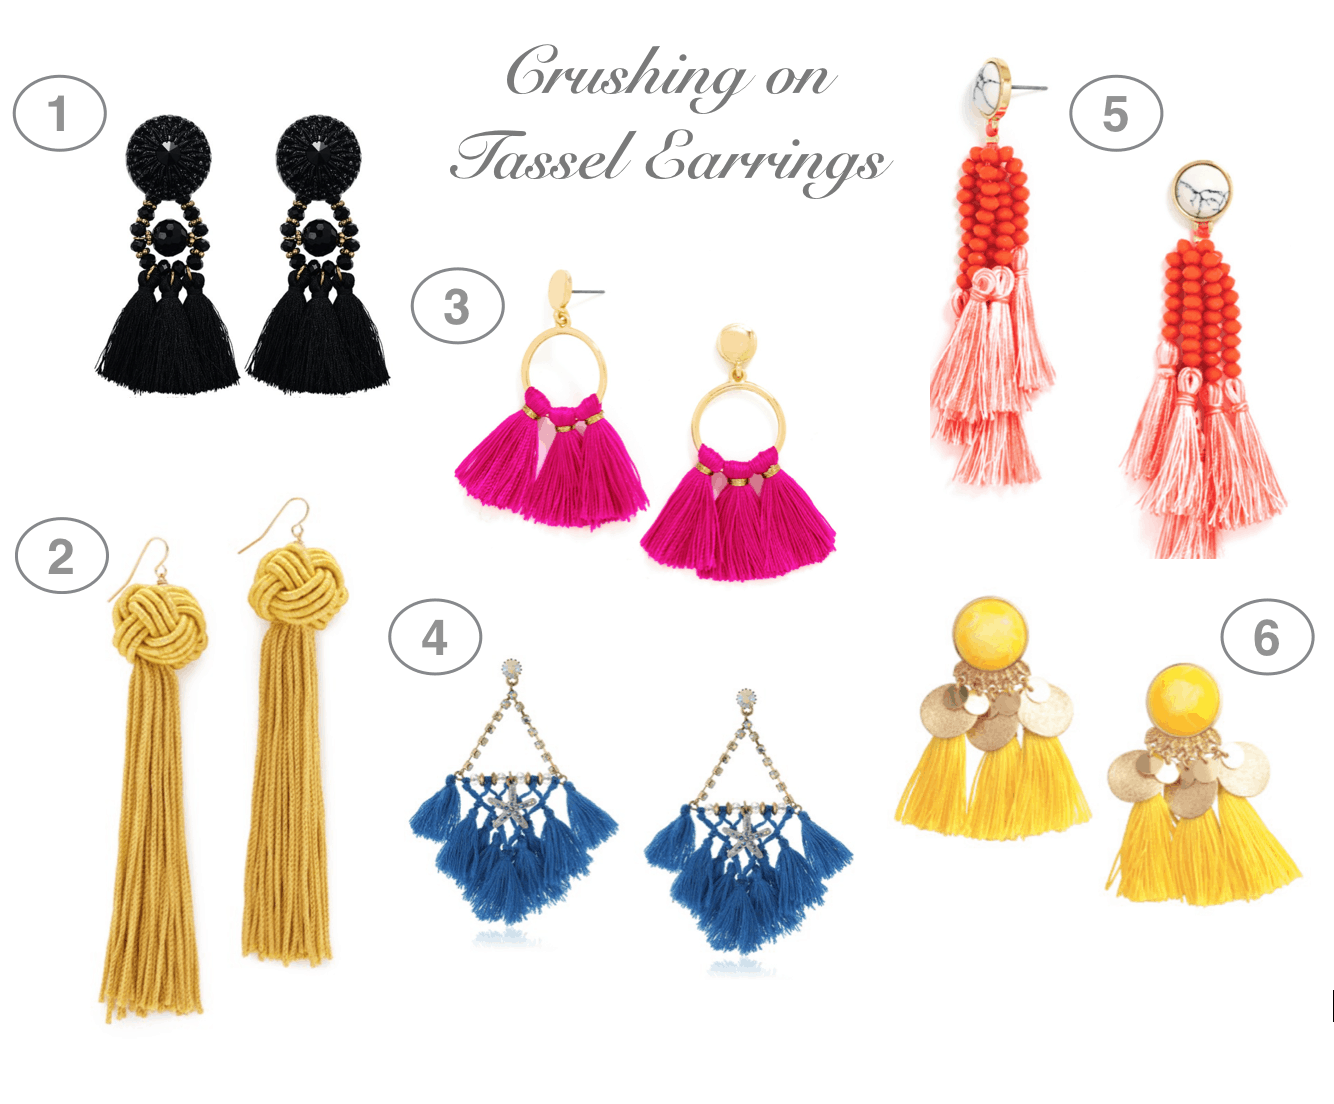 Dress Up Buttercup // A Houston-based fashion and inspiration blog developed to daily inspire your own personal style by Dede Raad | Crushing on Tassel Earrings